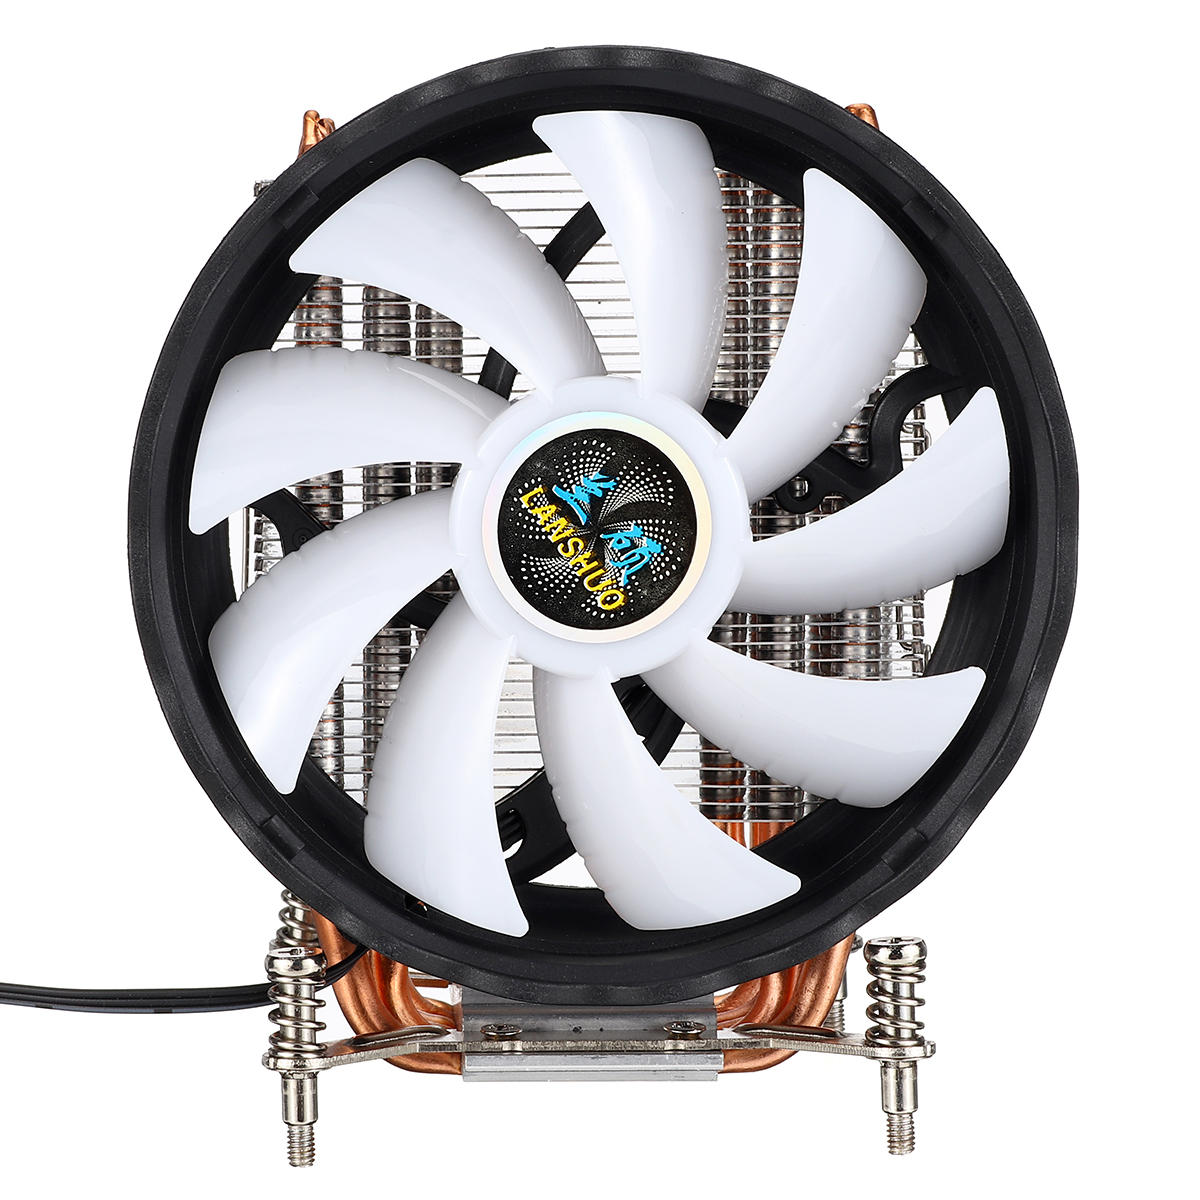 CPU Cooling Fan 12nm 6 Cooper Pipes 12 RGB Color Changing Air Cooler Fan for Intel 2011